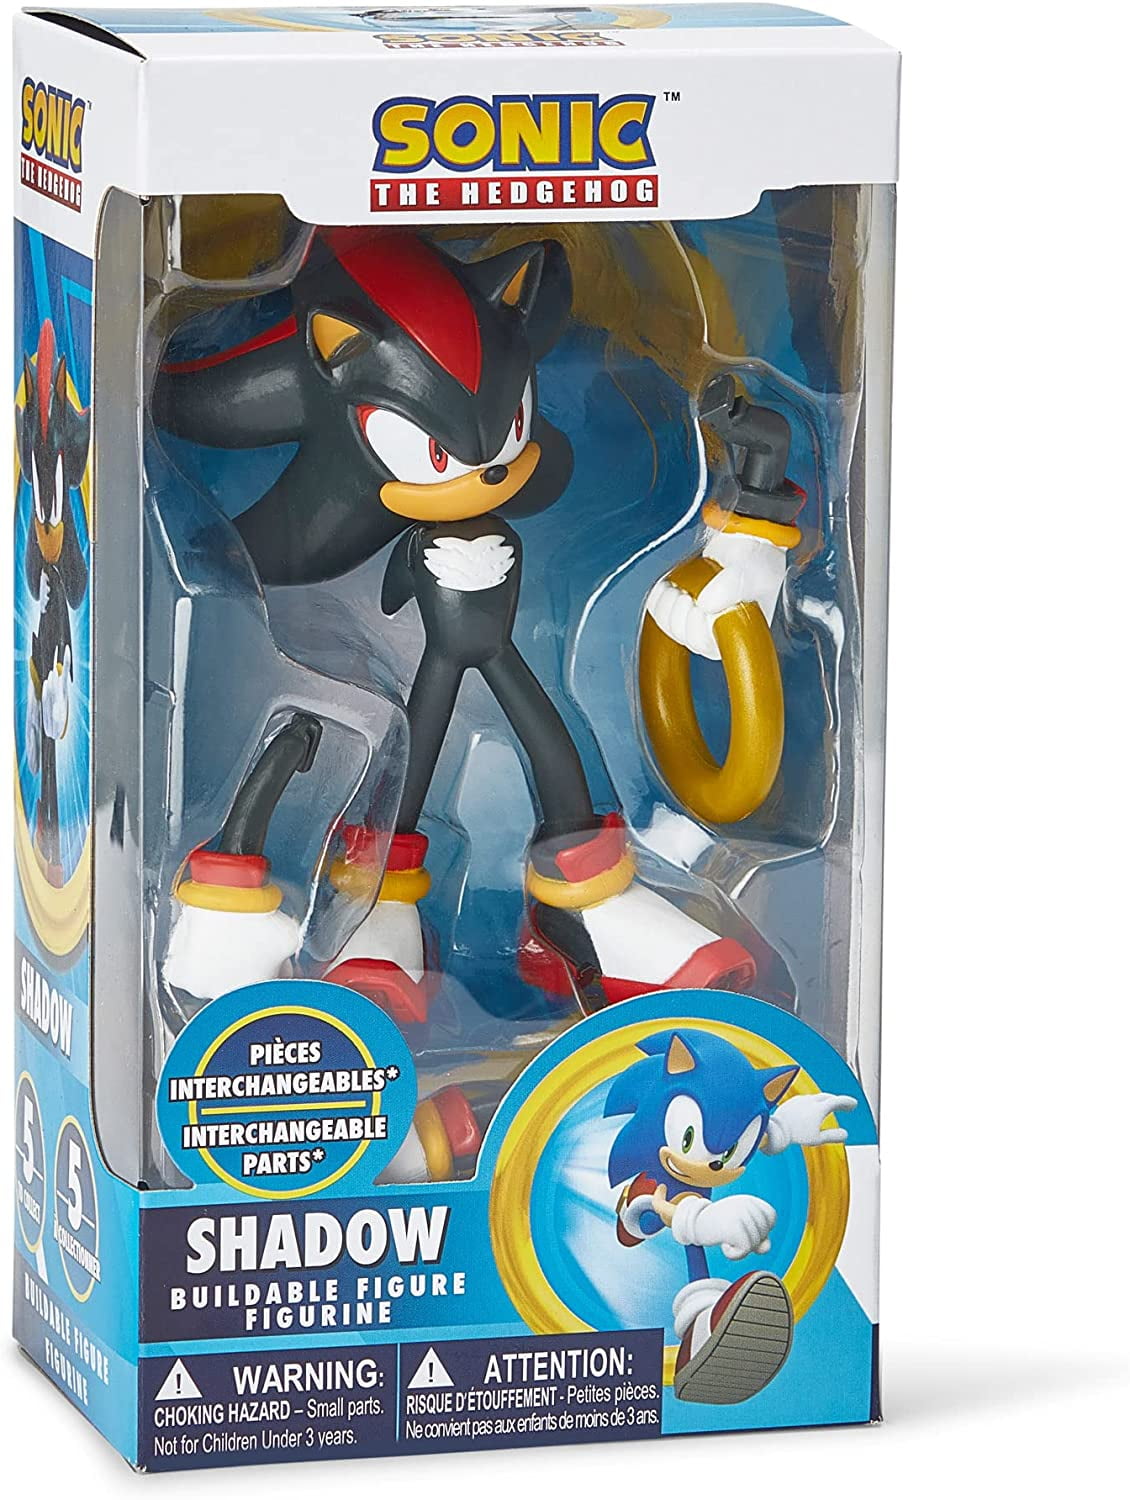 Sonic and amy, Sonic and shadow, Sonic